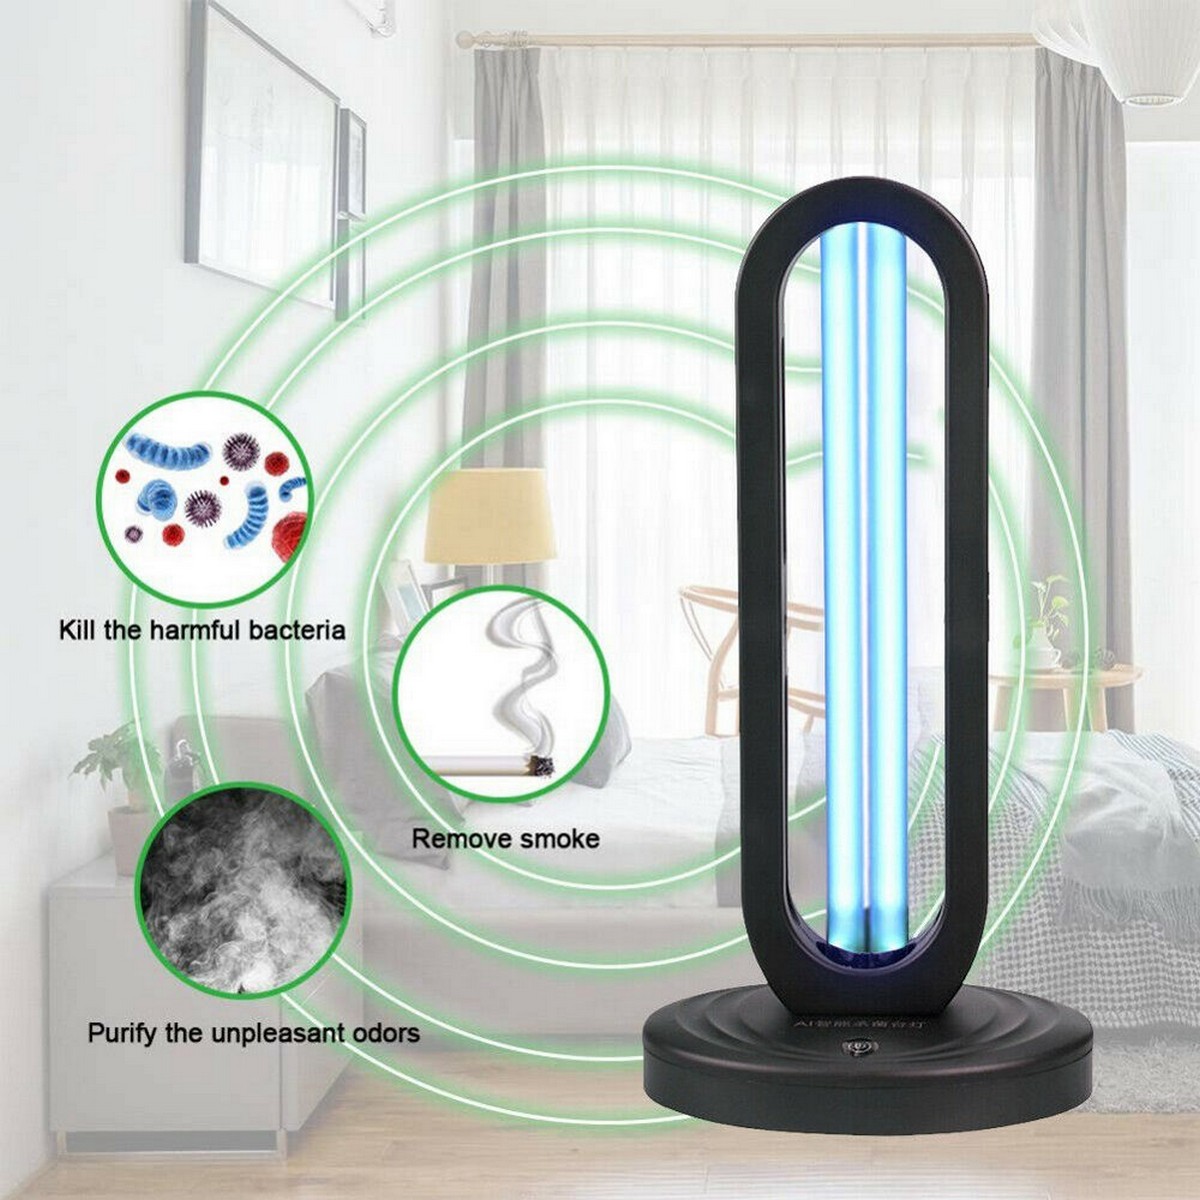 Mmm@ UV Germicidal Light Remote Control Timer 100W/150W Removable High Power Ultraviolet Lamp Car Disinfection Air Ozone & Free UVC Light Large-Areas Use Hospital School Factories and Others 